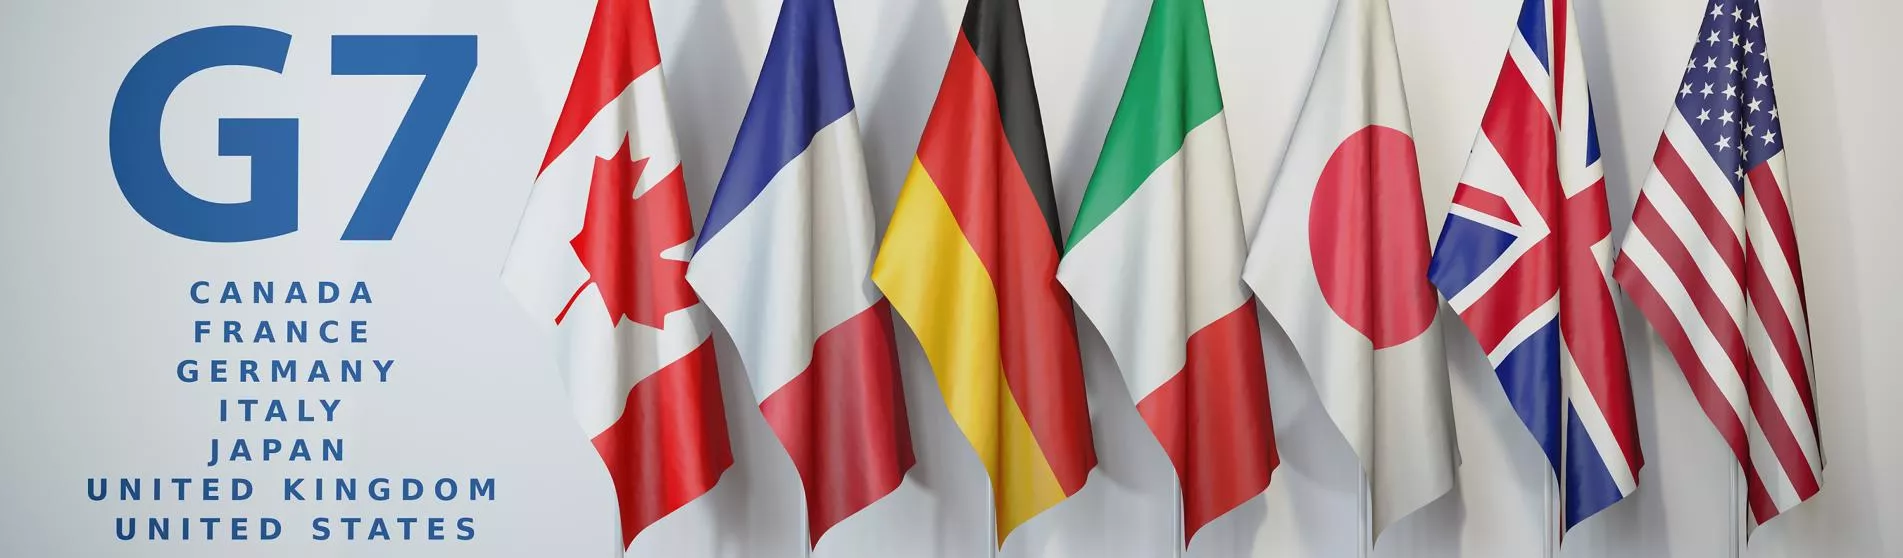 G7 flags images